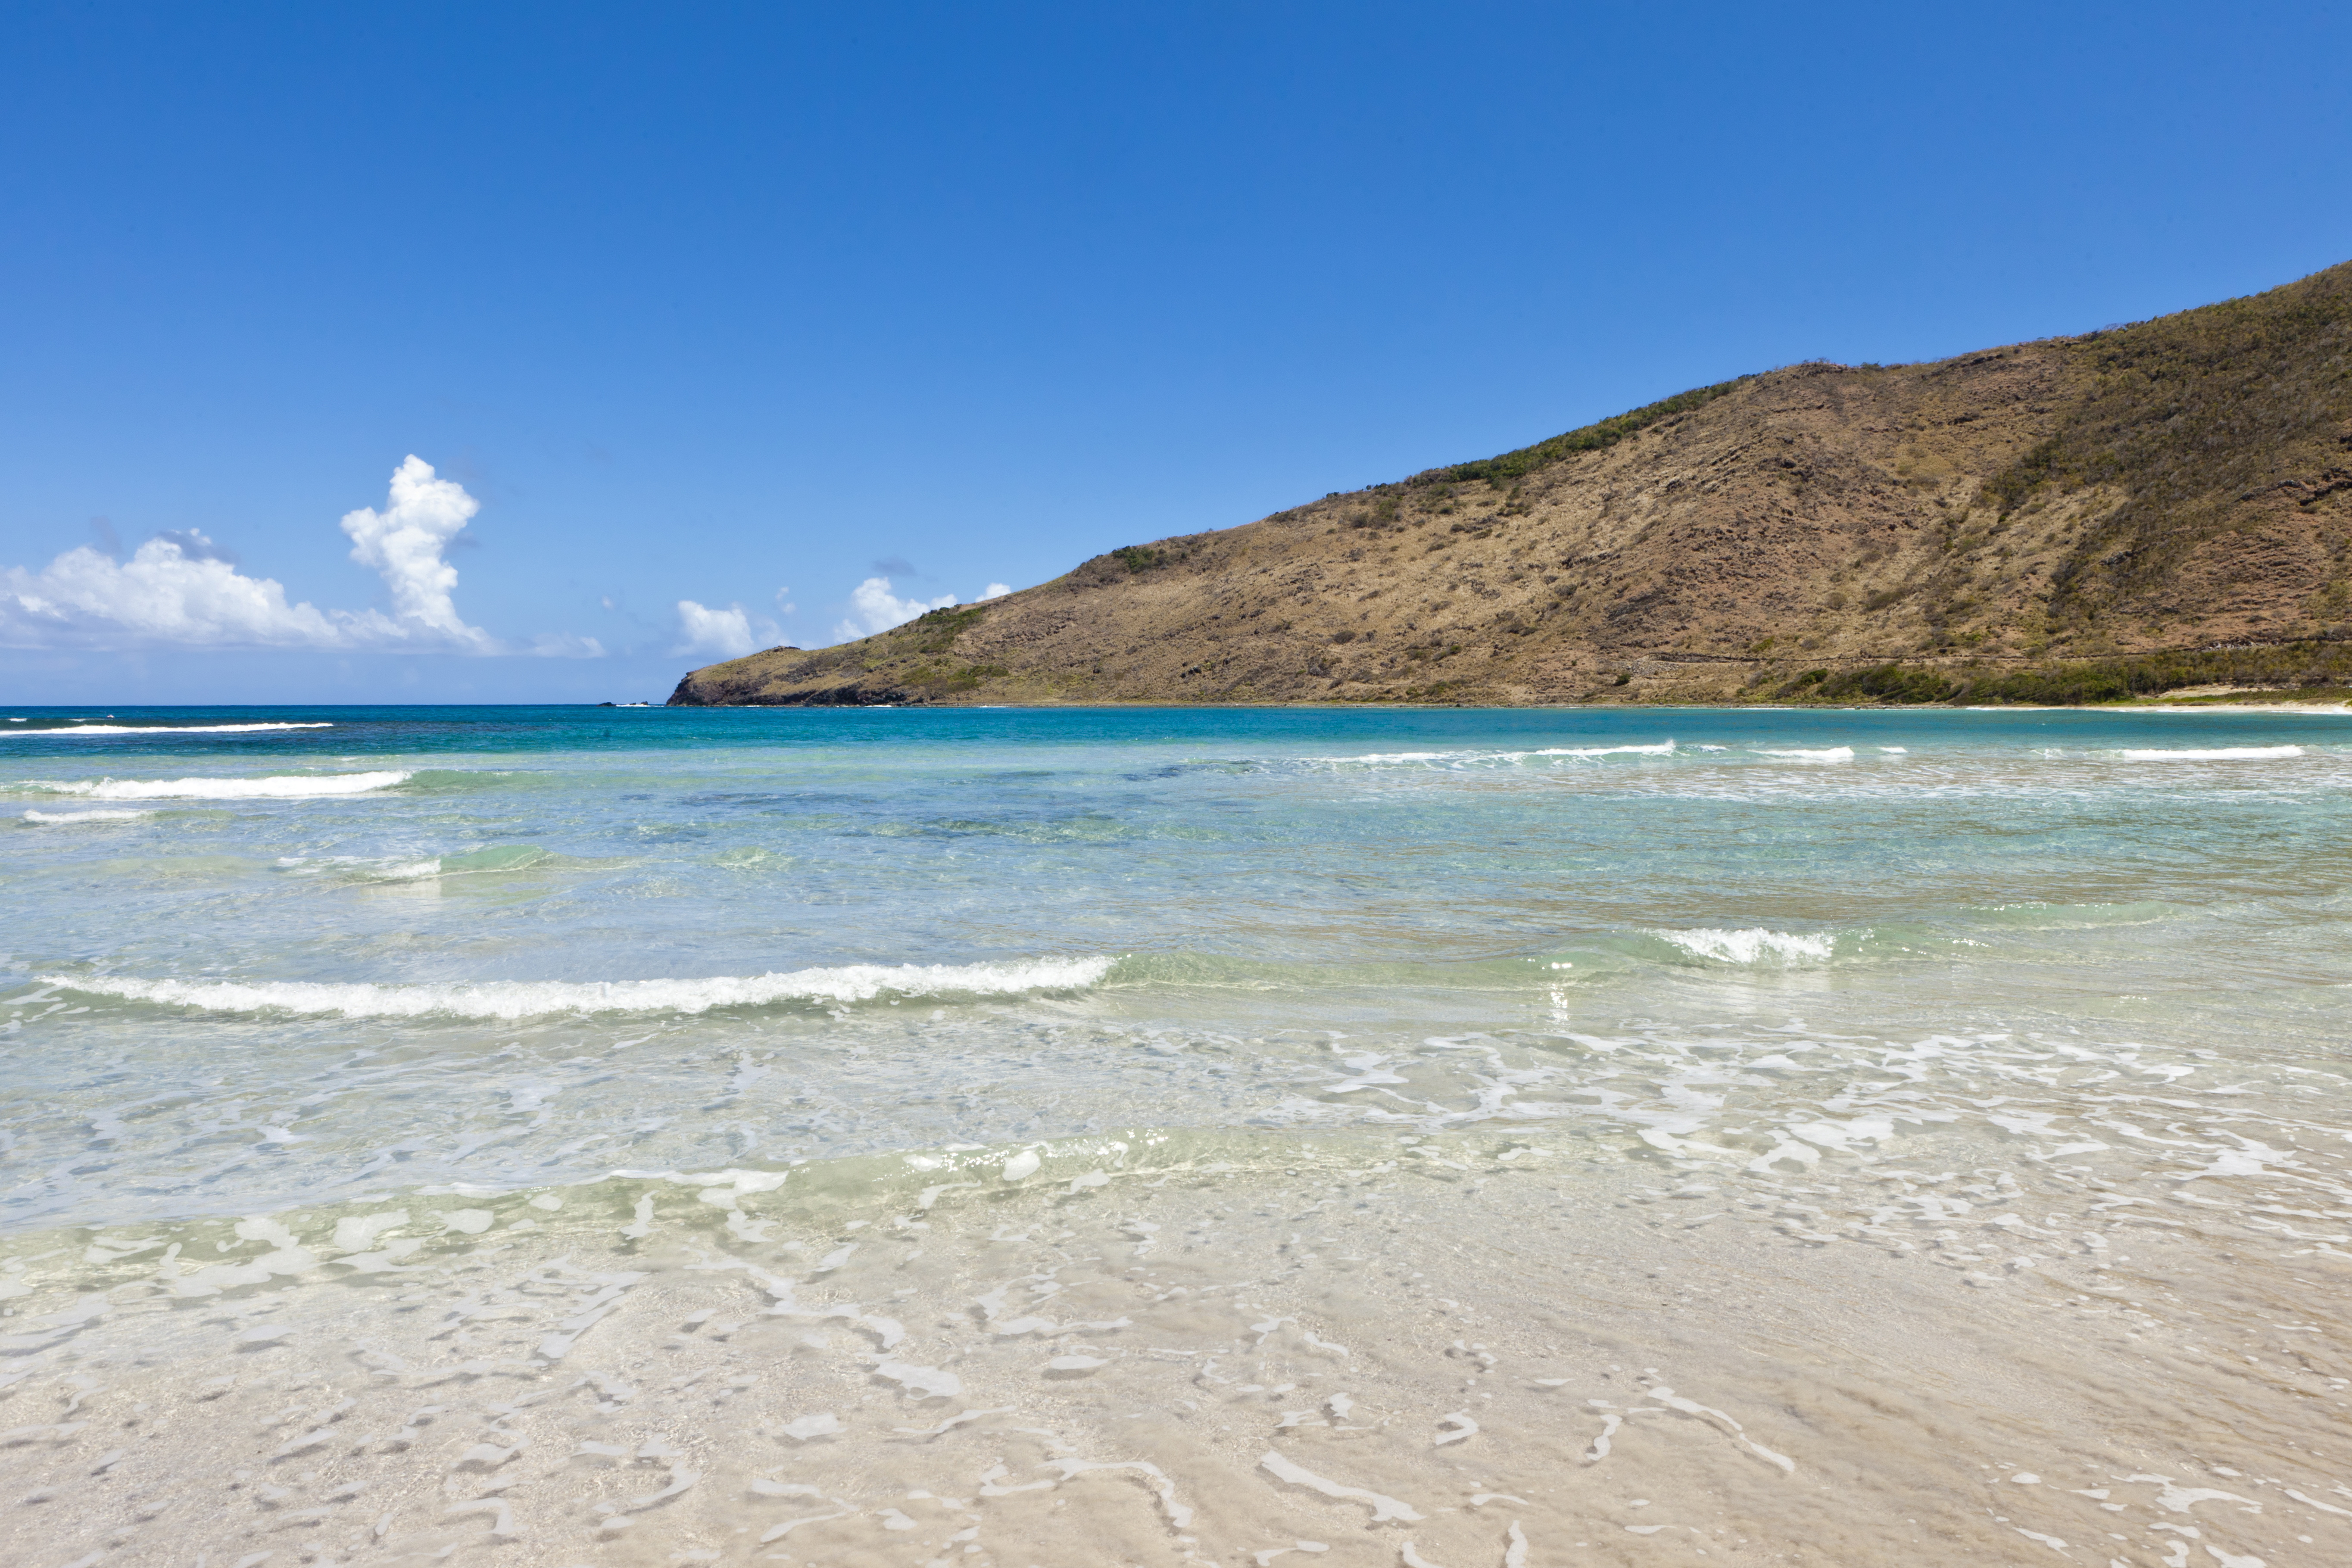 Things to Do in Nevis Based on Alexander Hamilton: Snorkel trip to St. Kitts